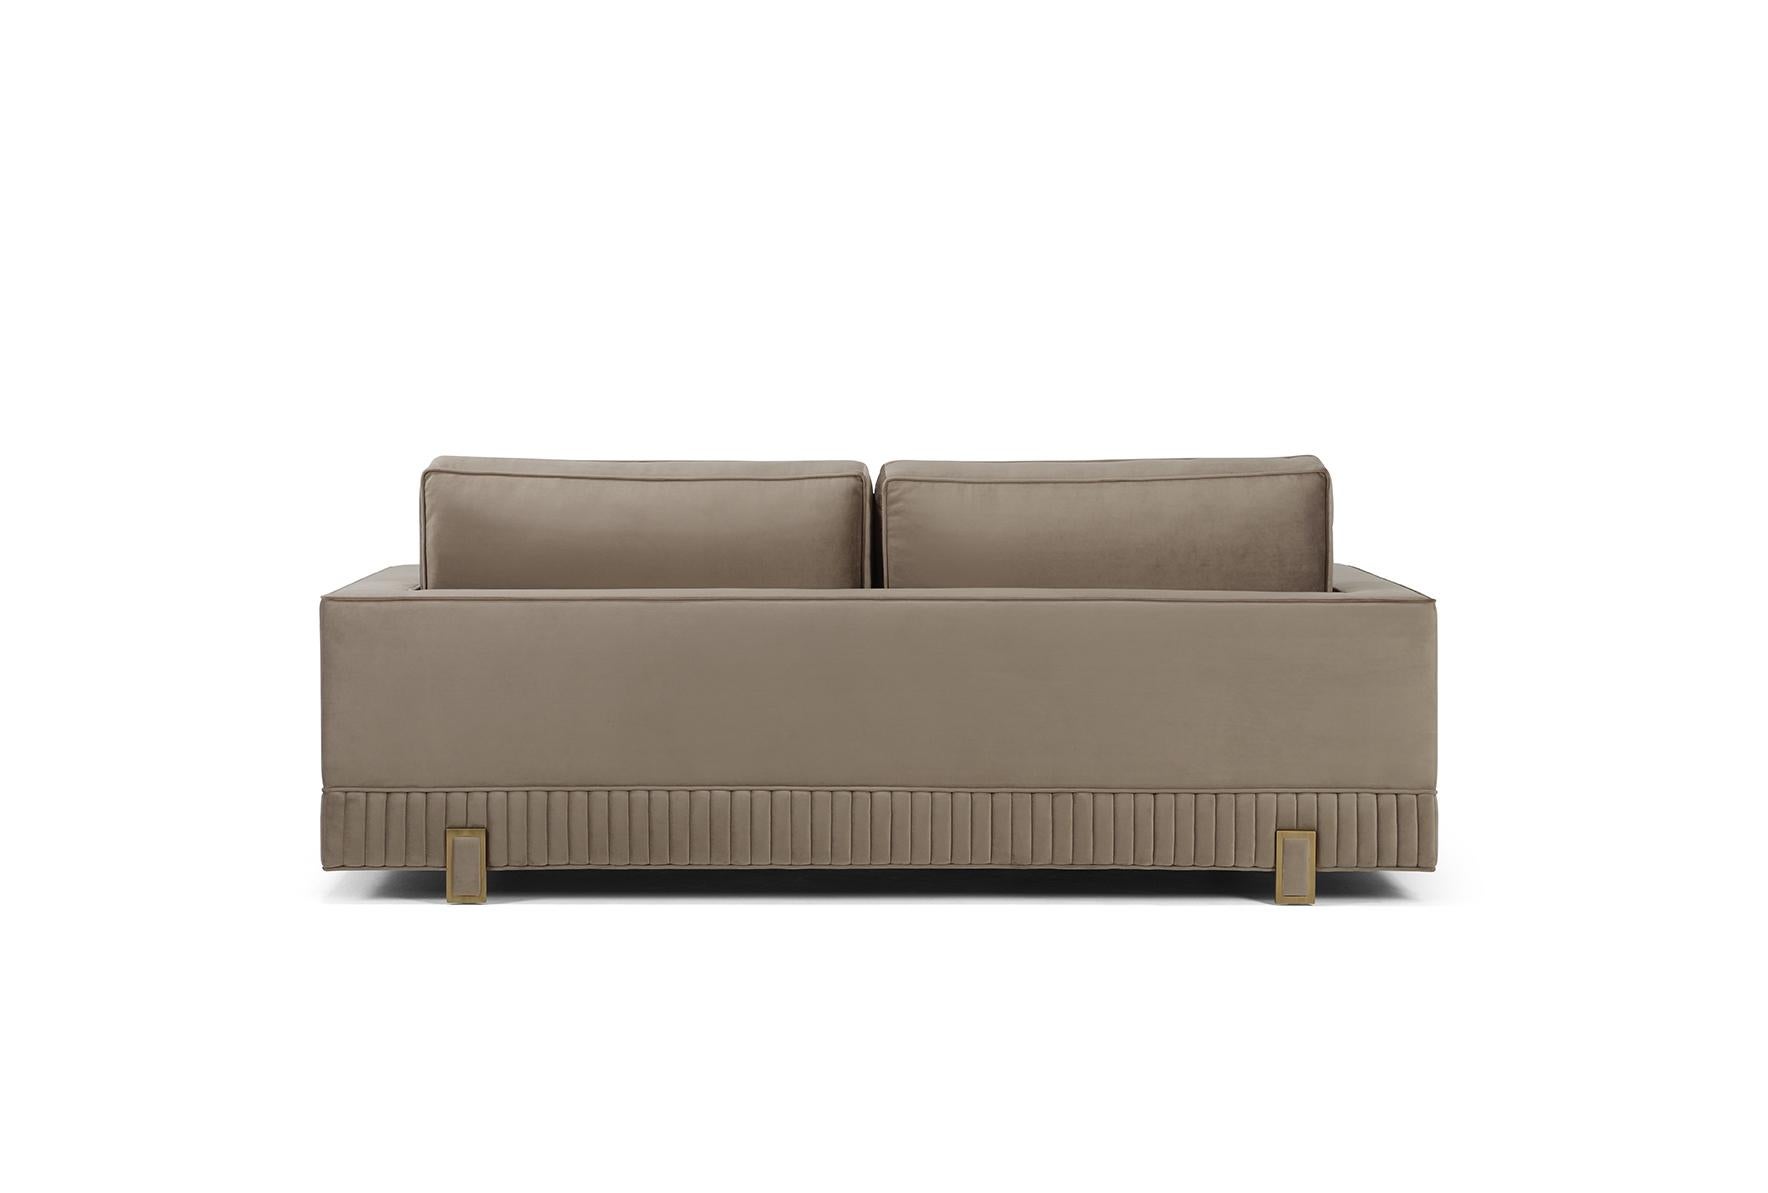 TAYLOR sofa has a balanced aesthetic shape and a contemporary, elegant and extremely comfortable style. With a feather-composed seat and backrest, Taylor was designed to be used on a daily basis. Highlighted by a delicate quilting at the base,